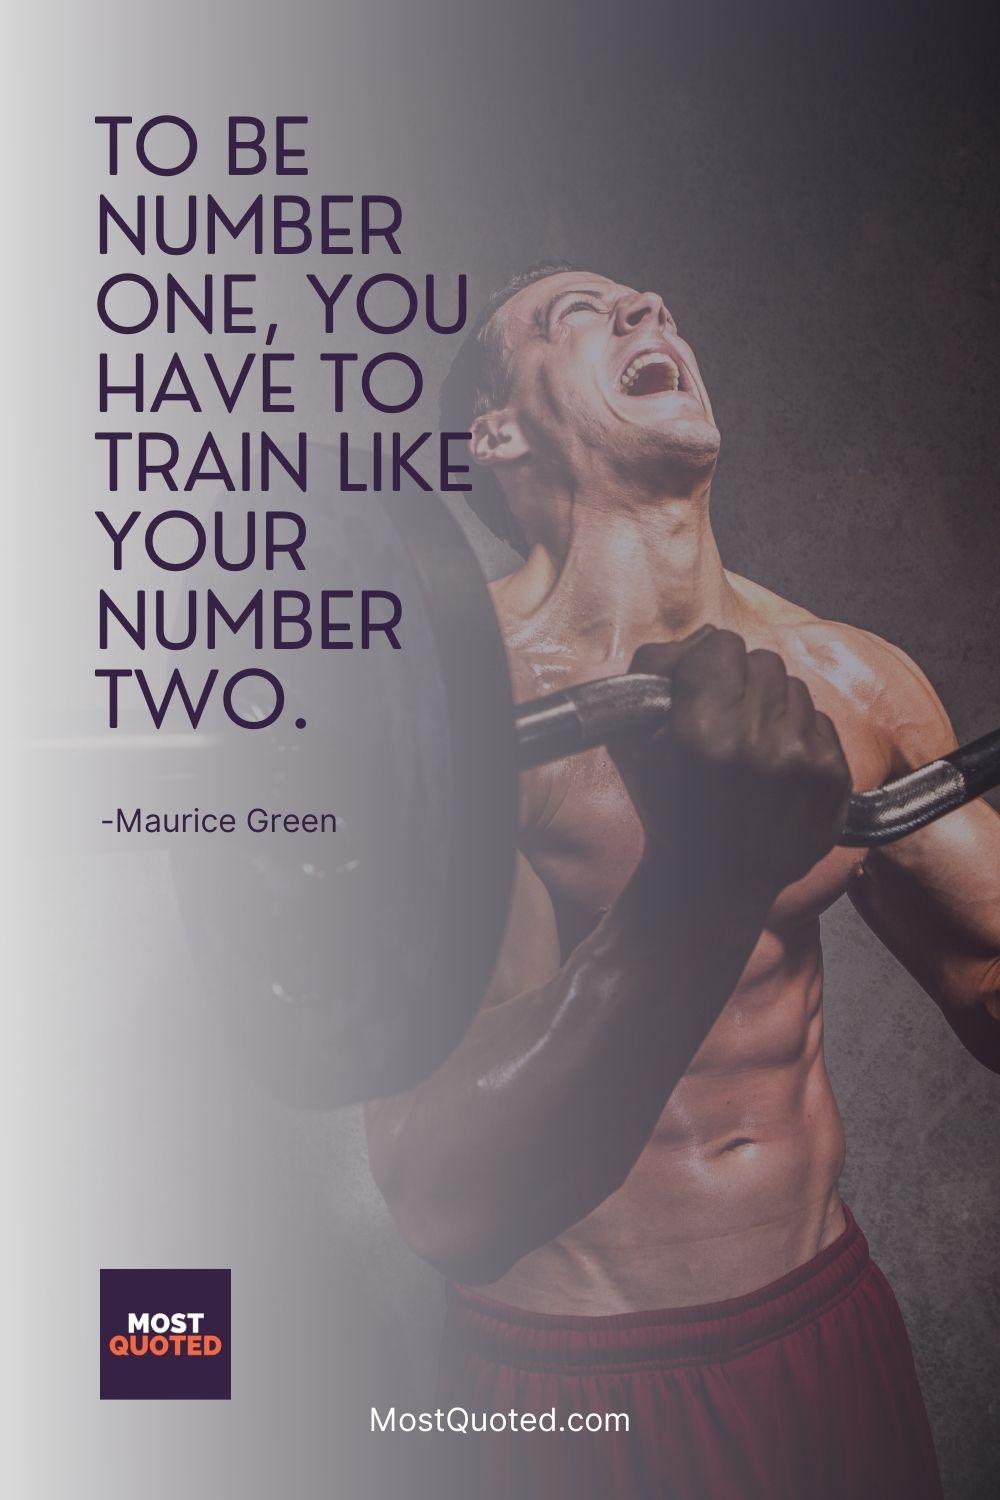 To be number one, you have to train like your number two.